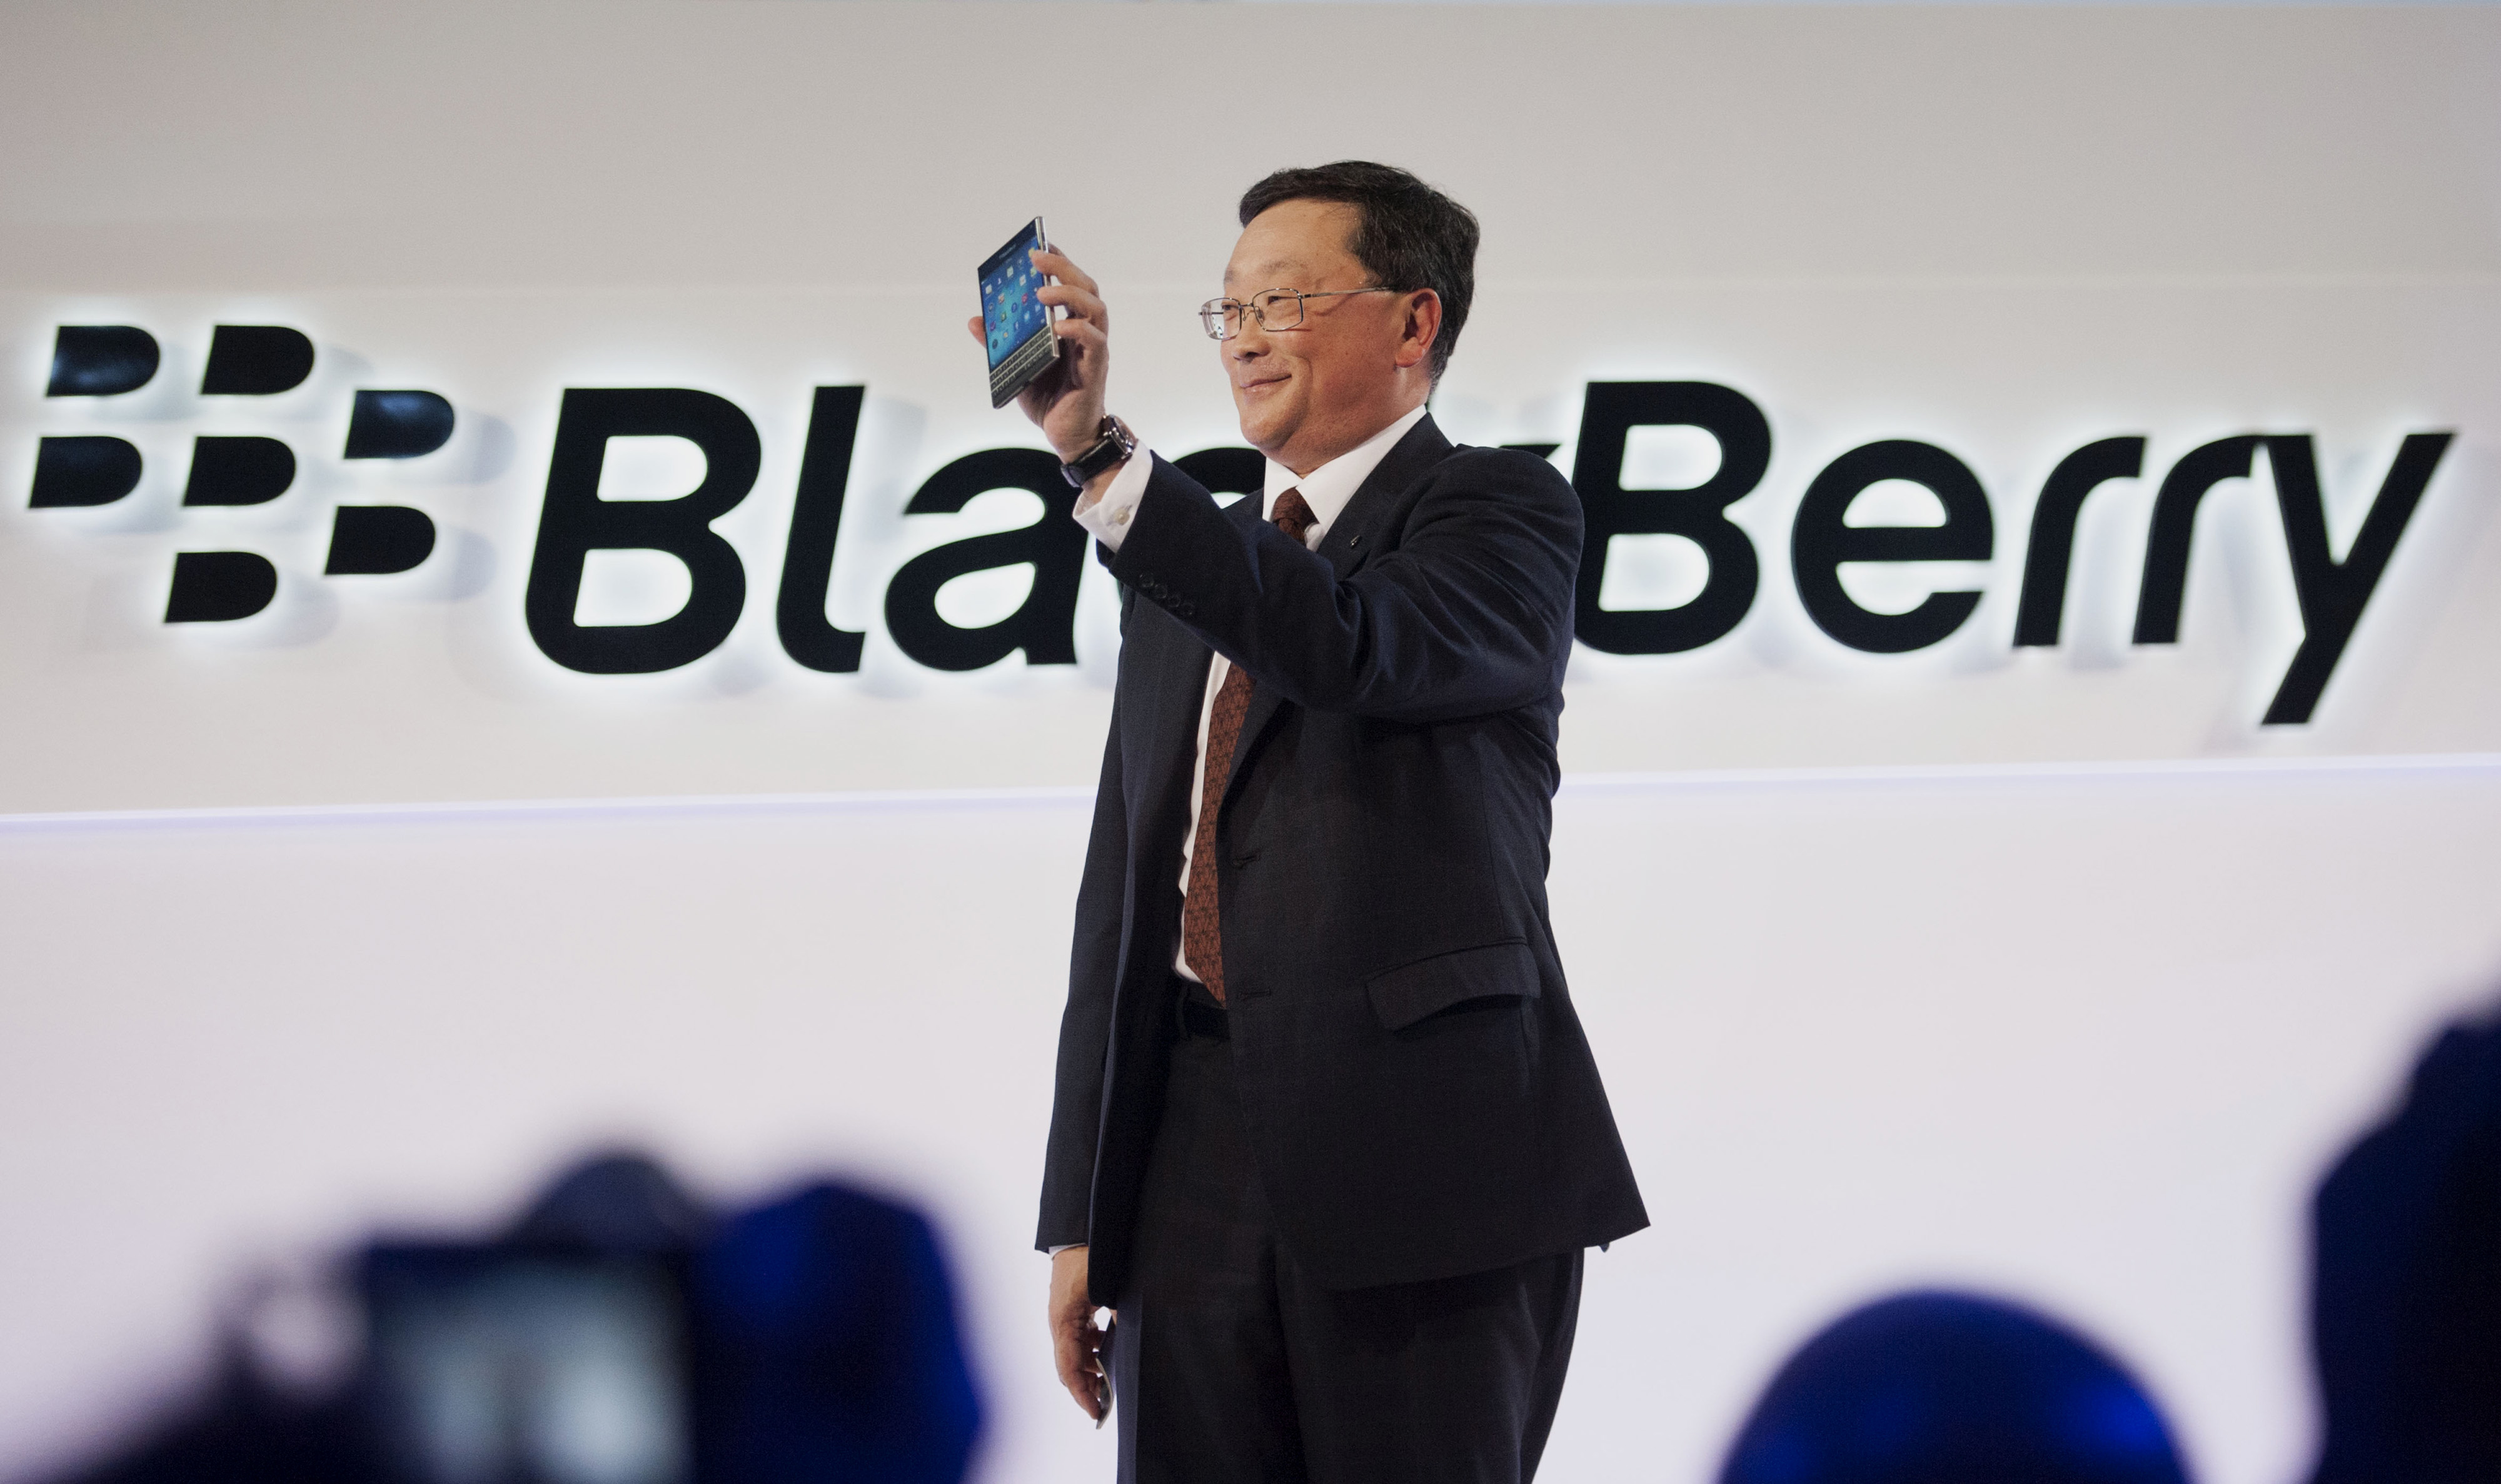 John Chen, chief executive officer of BlackBerry Ltd., displays the new Passport smartphone during a product announcement in Toronto, Ontario, Canada, on Wednesday, Sept. 24, 2014. The square-screened Passport is BlackBerry's first major new device slated for a global introduction since Chen set out in November to turn around the company by shifting away from the consumer market toward business and professional users. Photographer: Hannah Yoon/Bloomberg via Getty Images